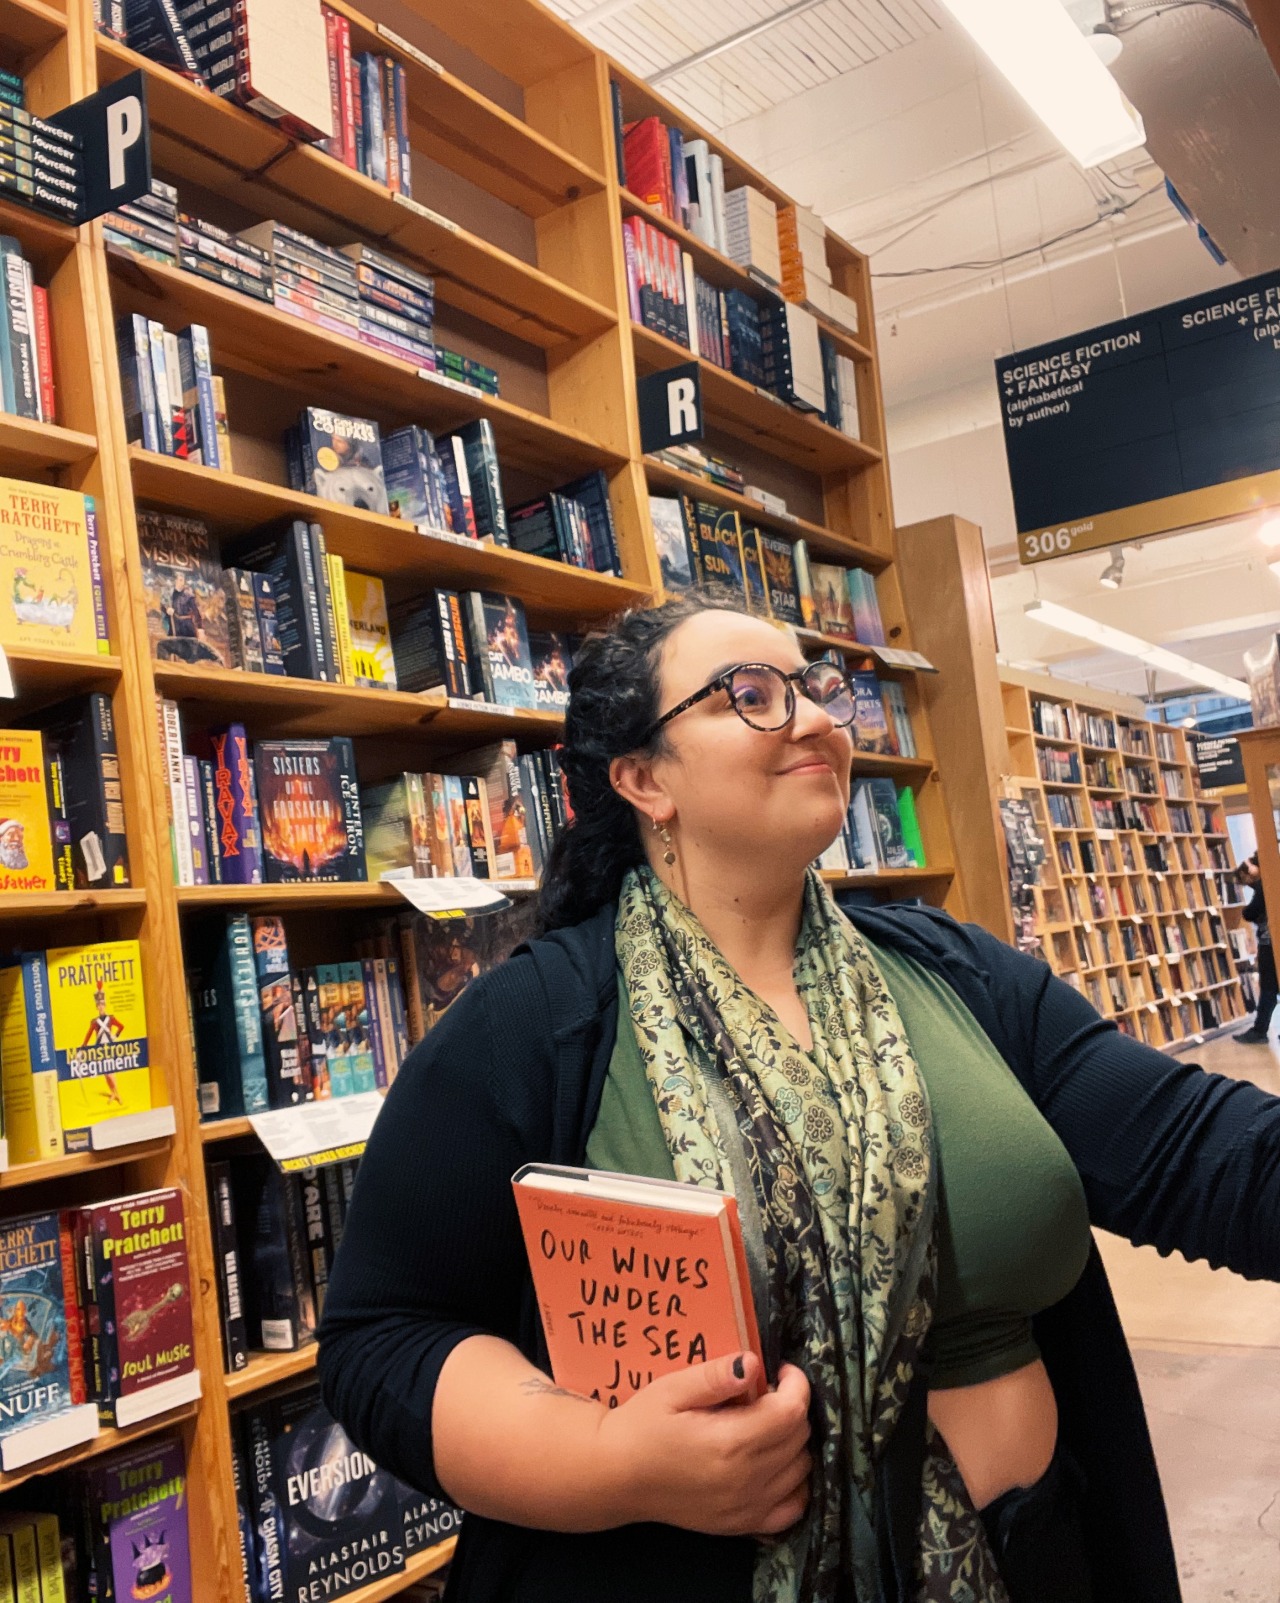 It should surprise none of you that I loved Powell’s City of Books. One more famous bookstore checked off my bucket list!
I walked away with Julia Armfield’s Our Wives Under the Sea and a signed edition of Silvia Moreno-García’s The Daughter of...